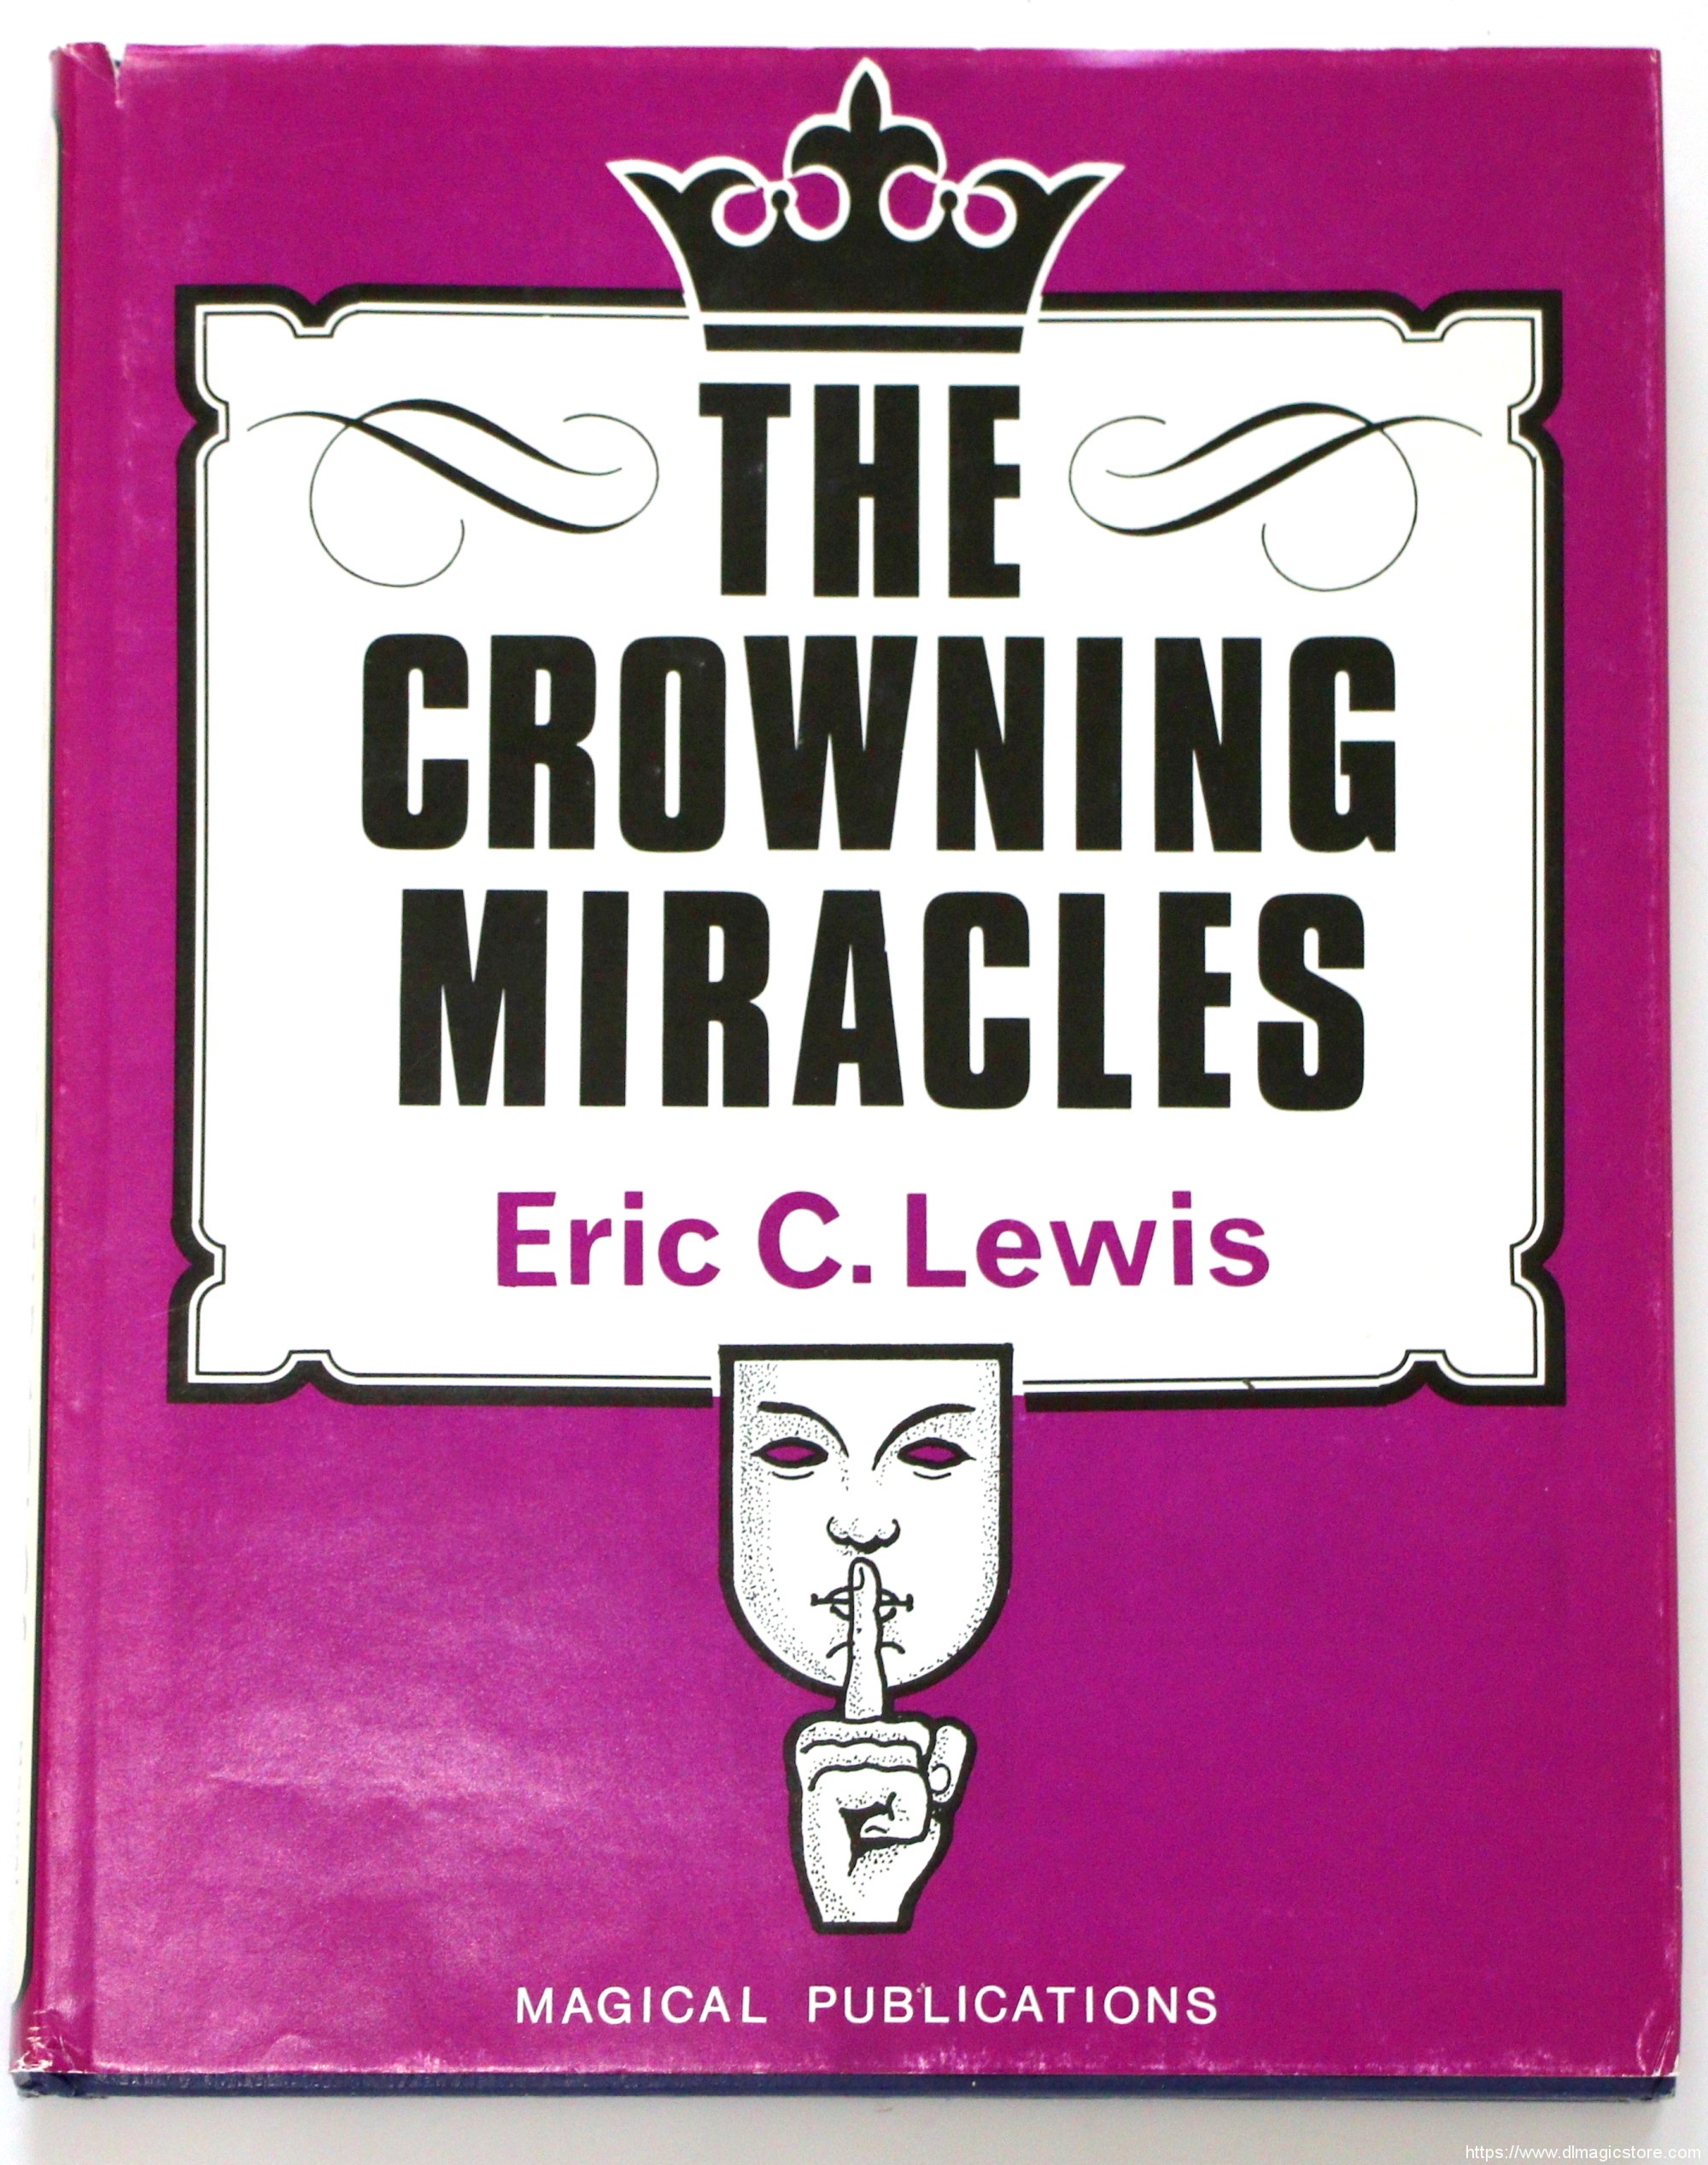 The Crowning Miracles by Eric C. Lewis